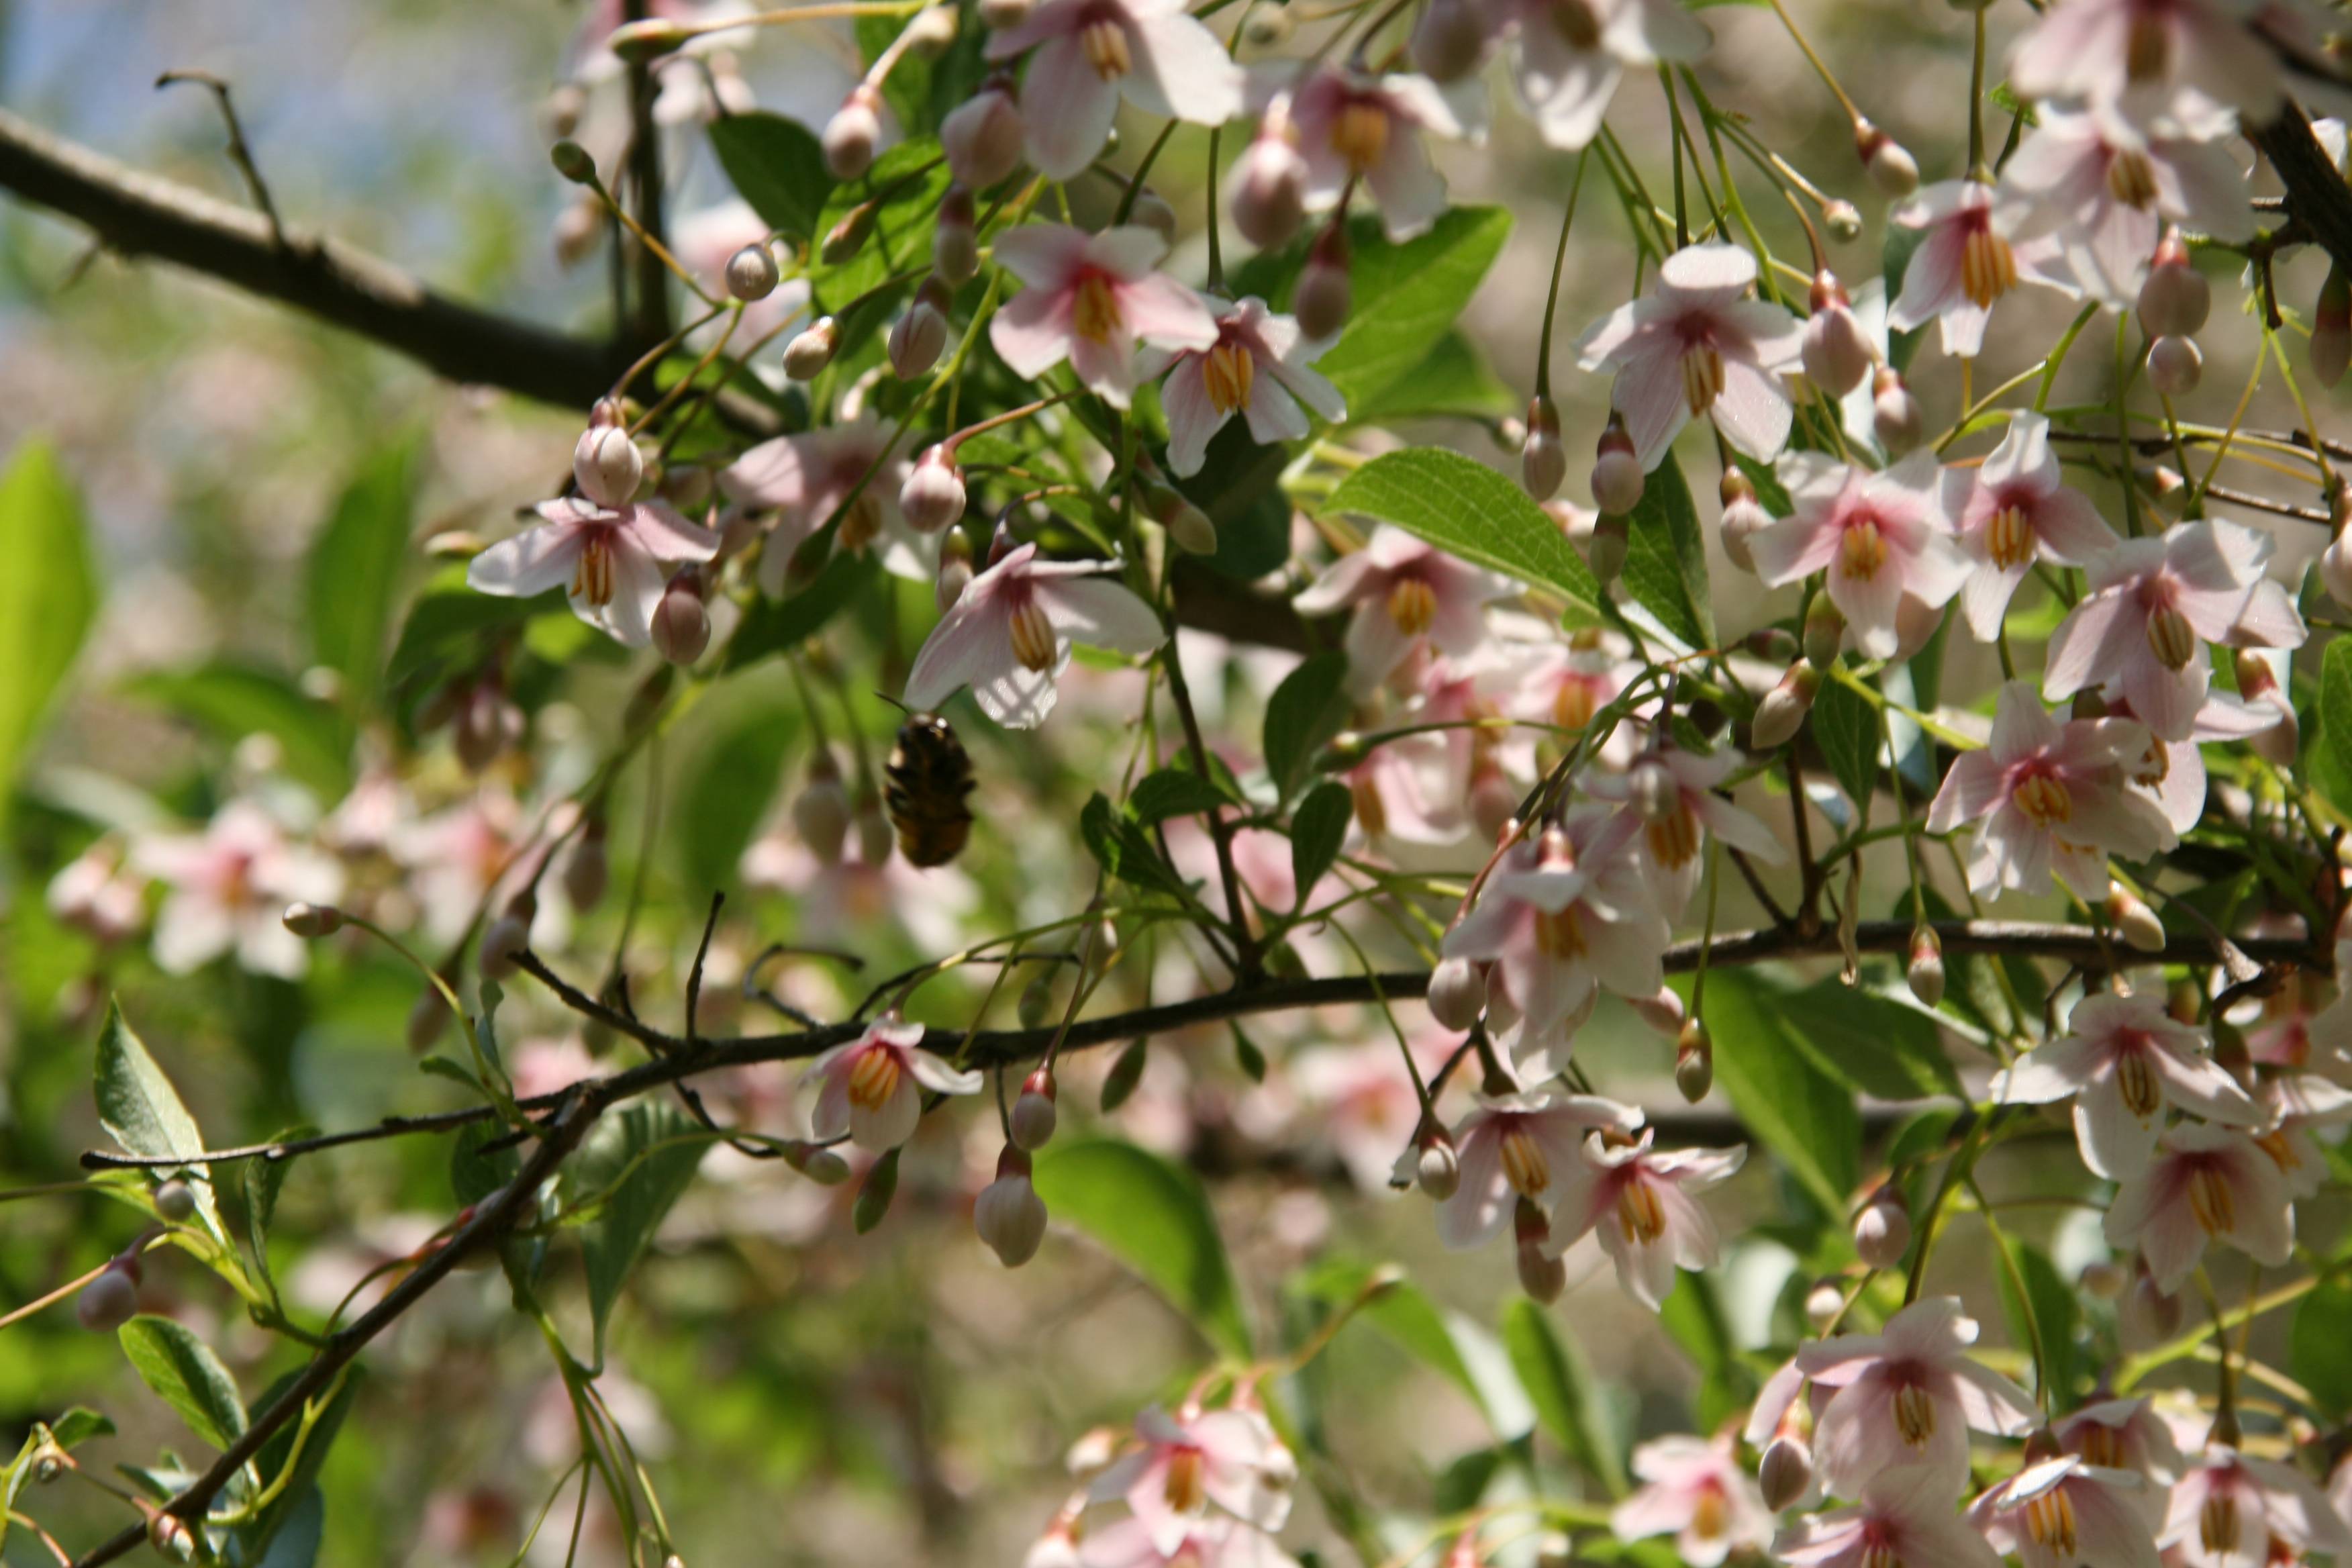 light-pink flowers and buds with green leaves and brown branches